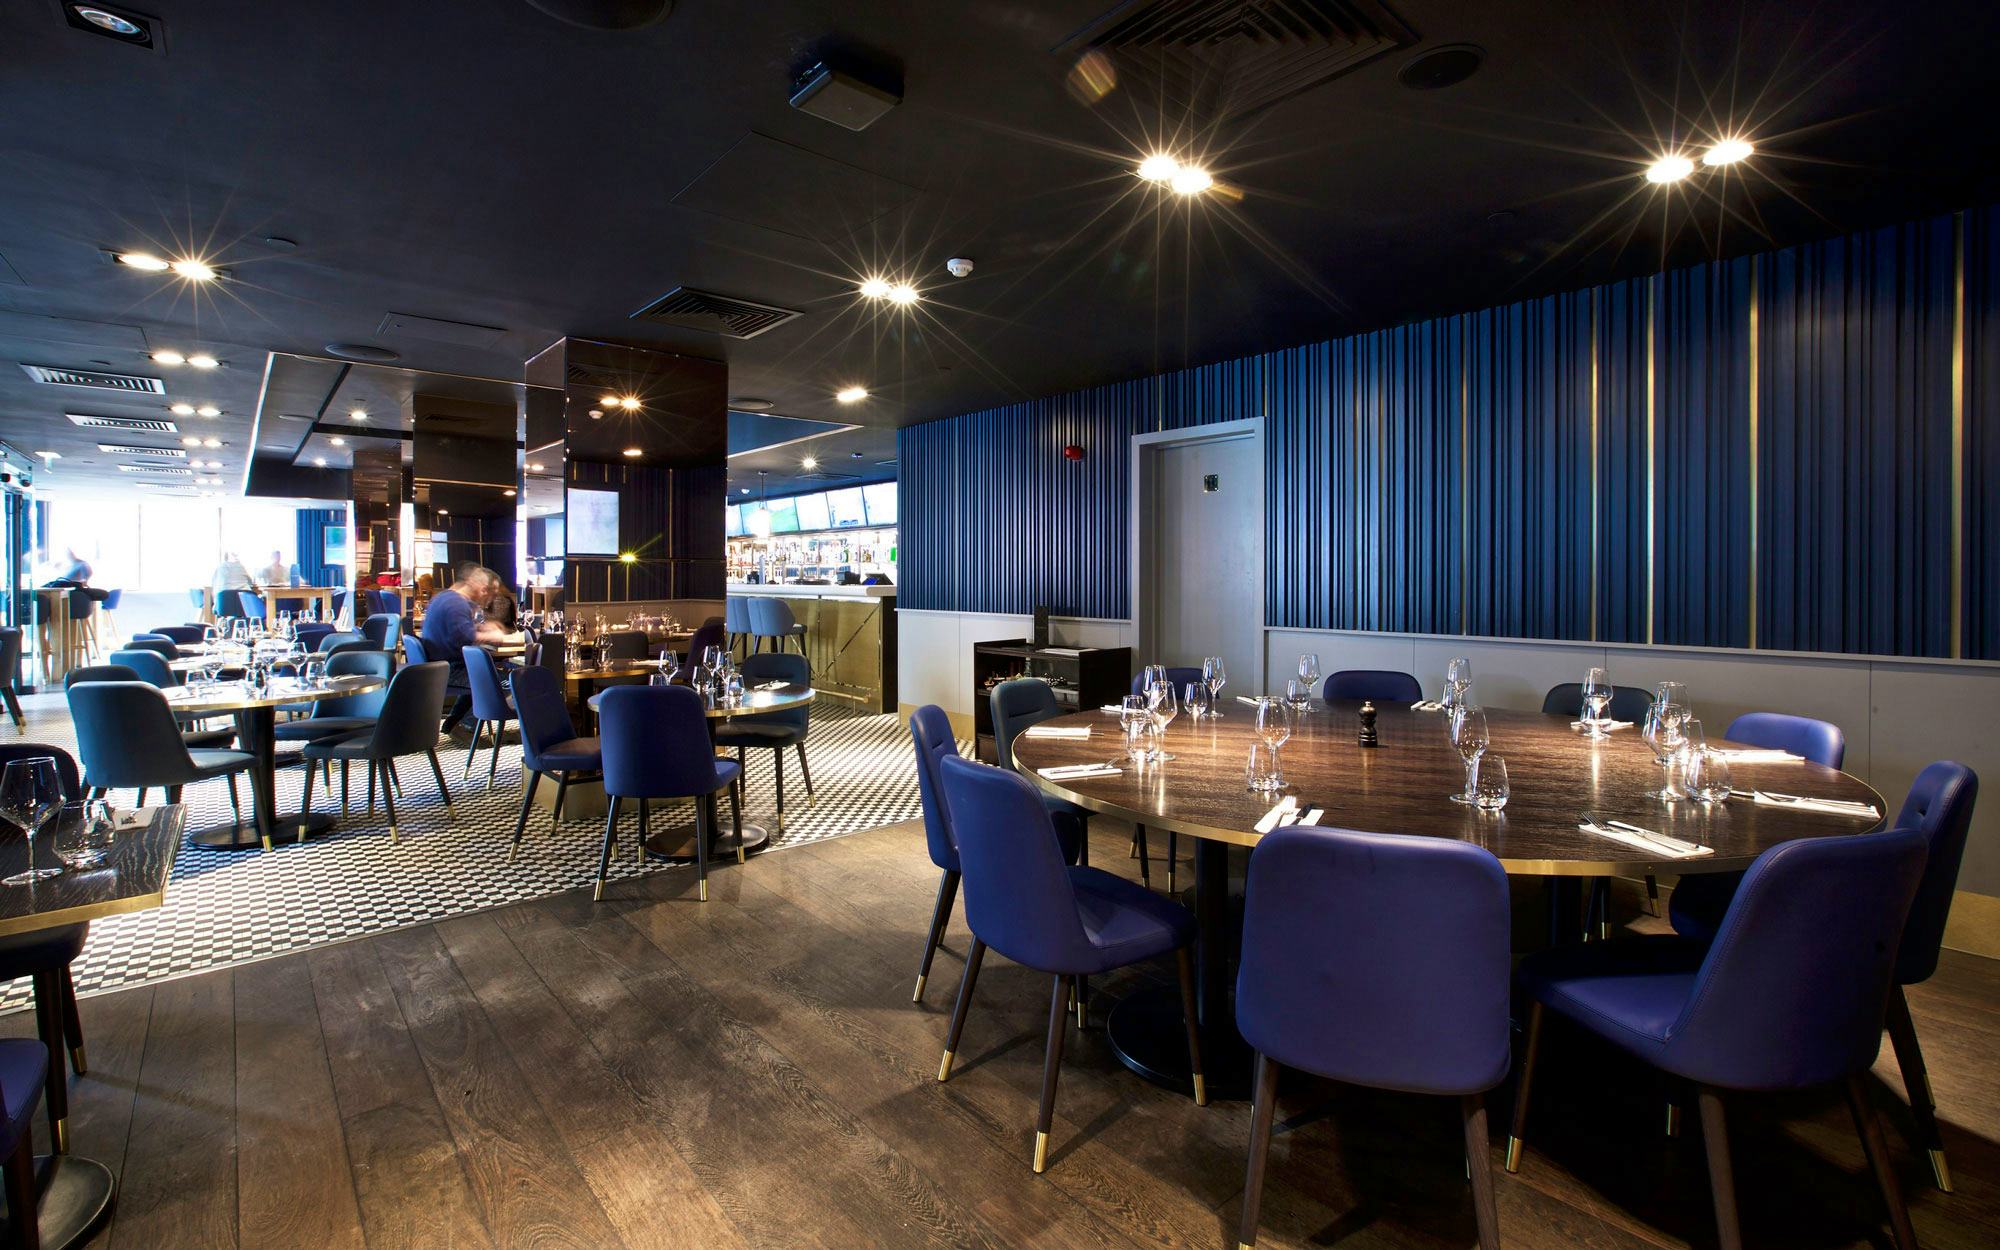 Frankie's Bar & Grill at Chelsea Football Club new interiors